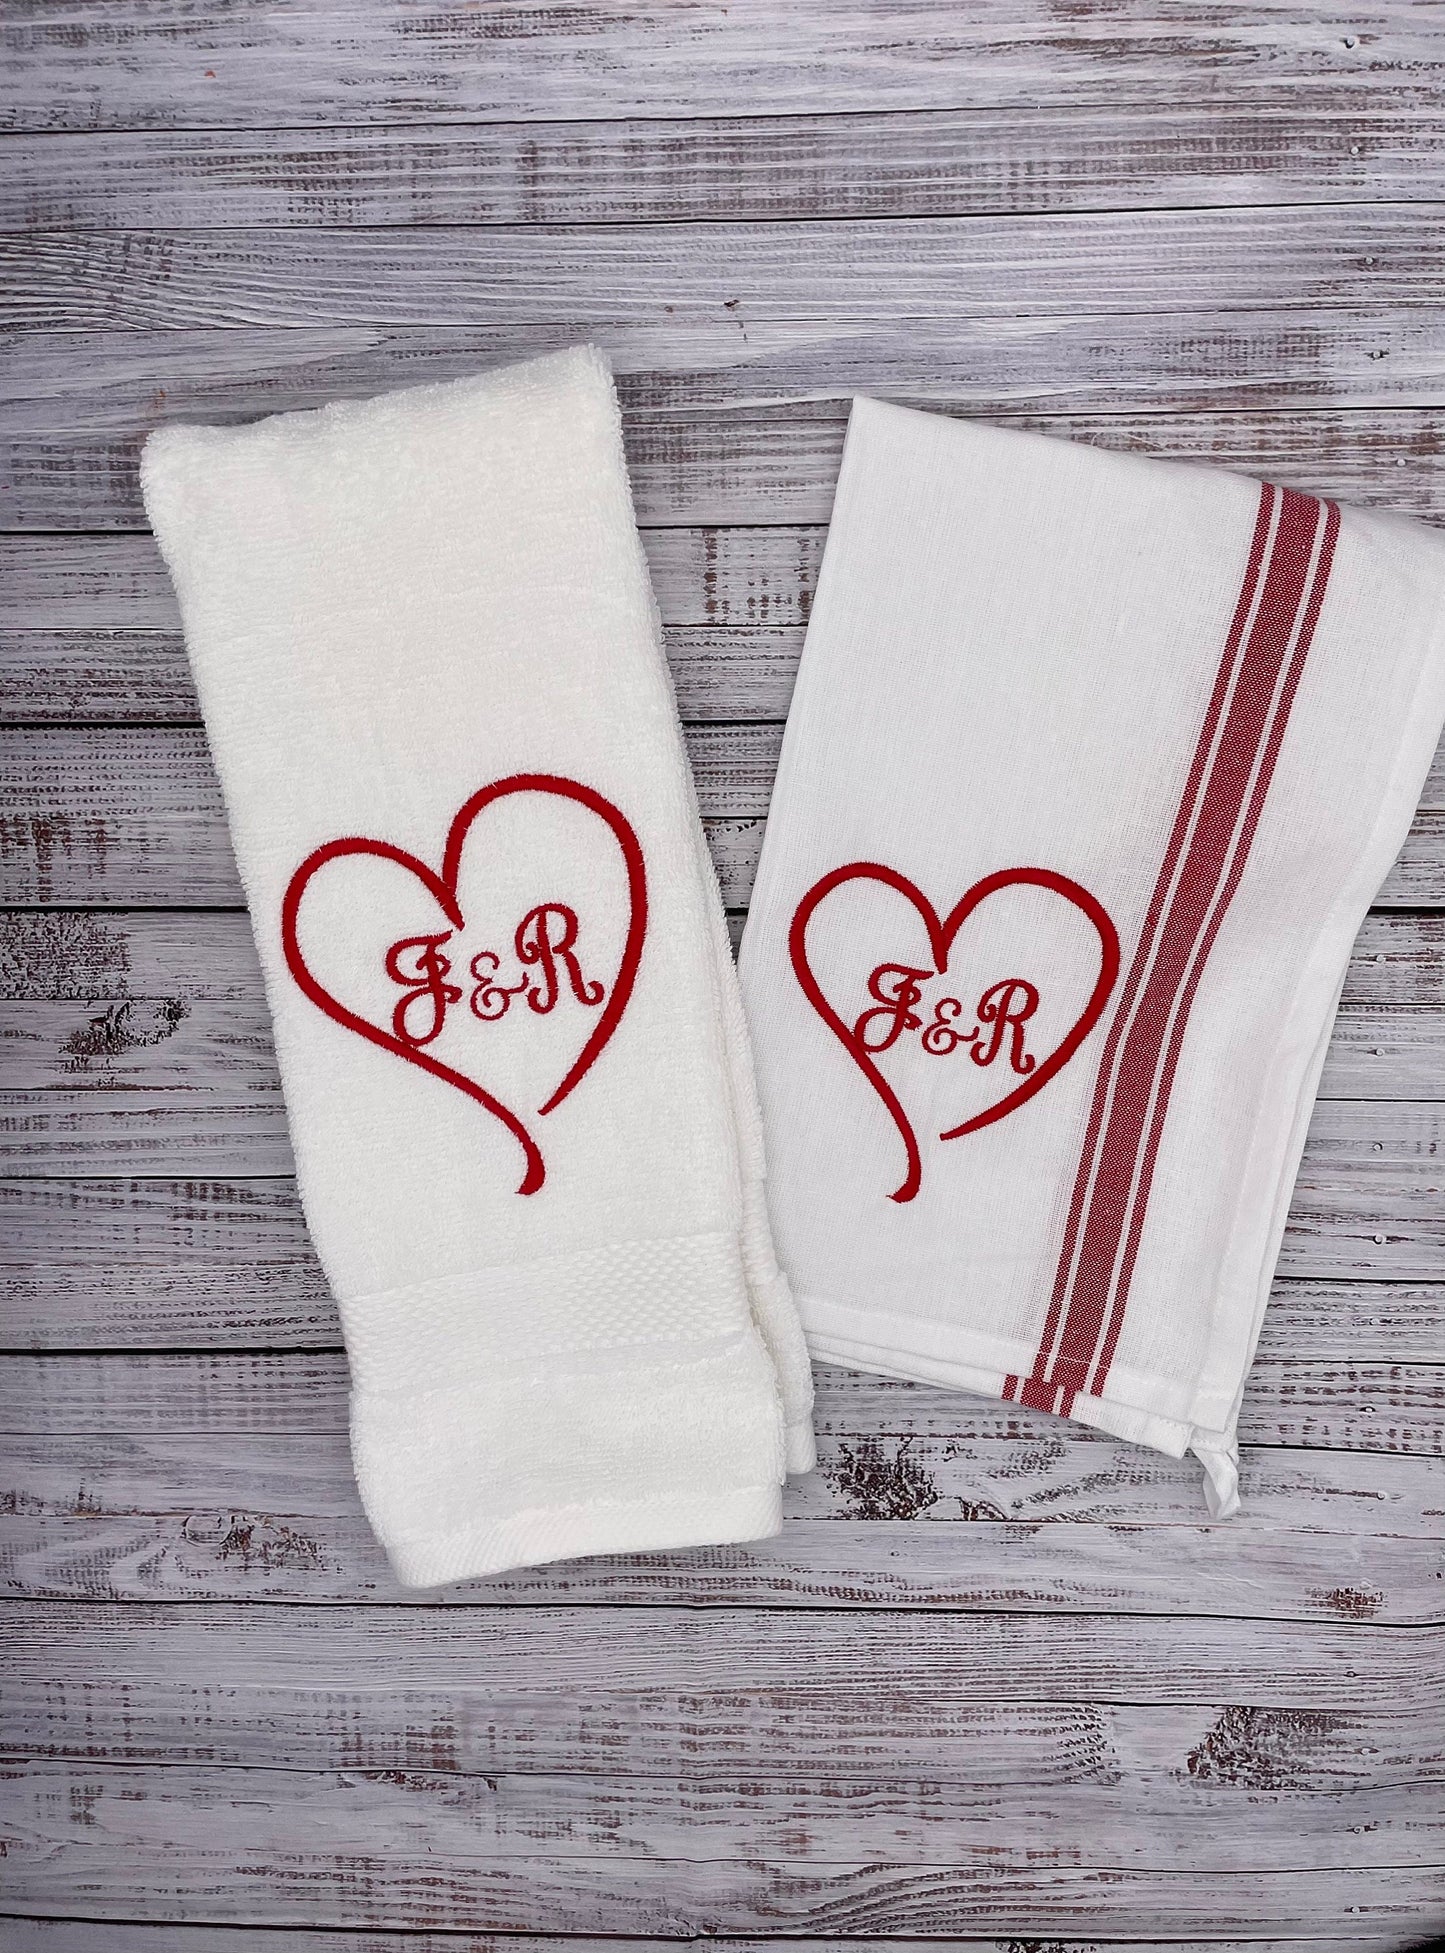 Love Personalized Bathroom Hand Towels -Cotton- Embroidered-Choose your Colors